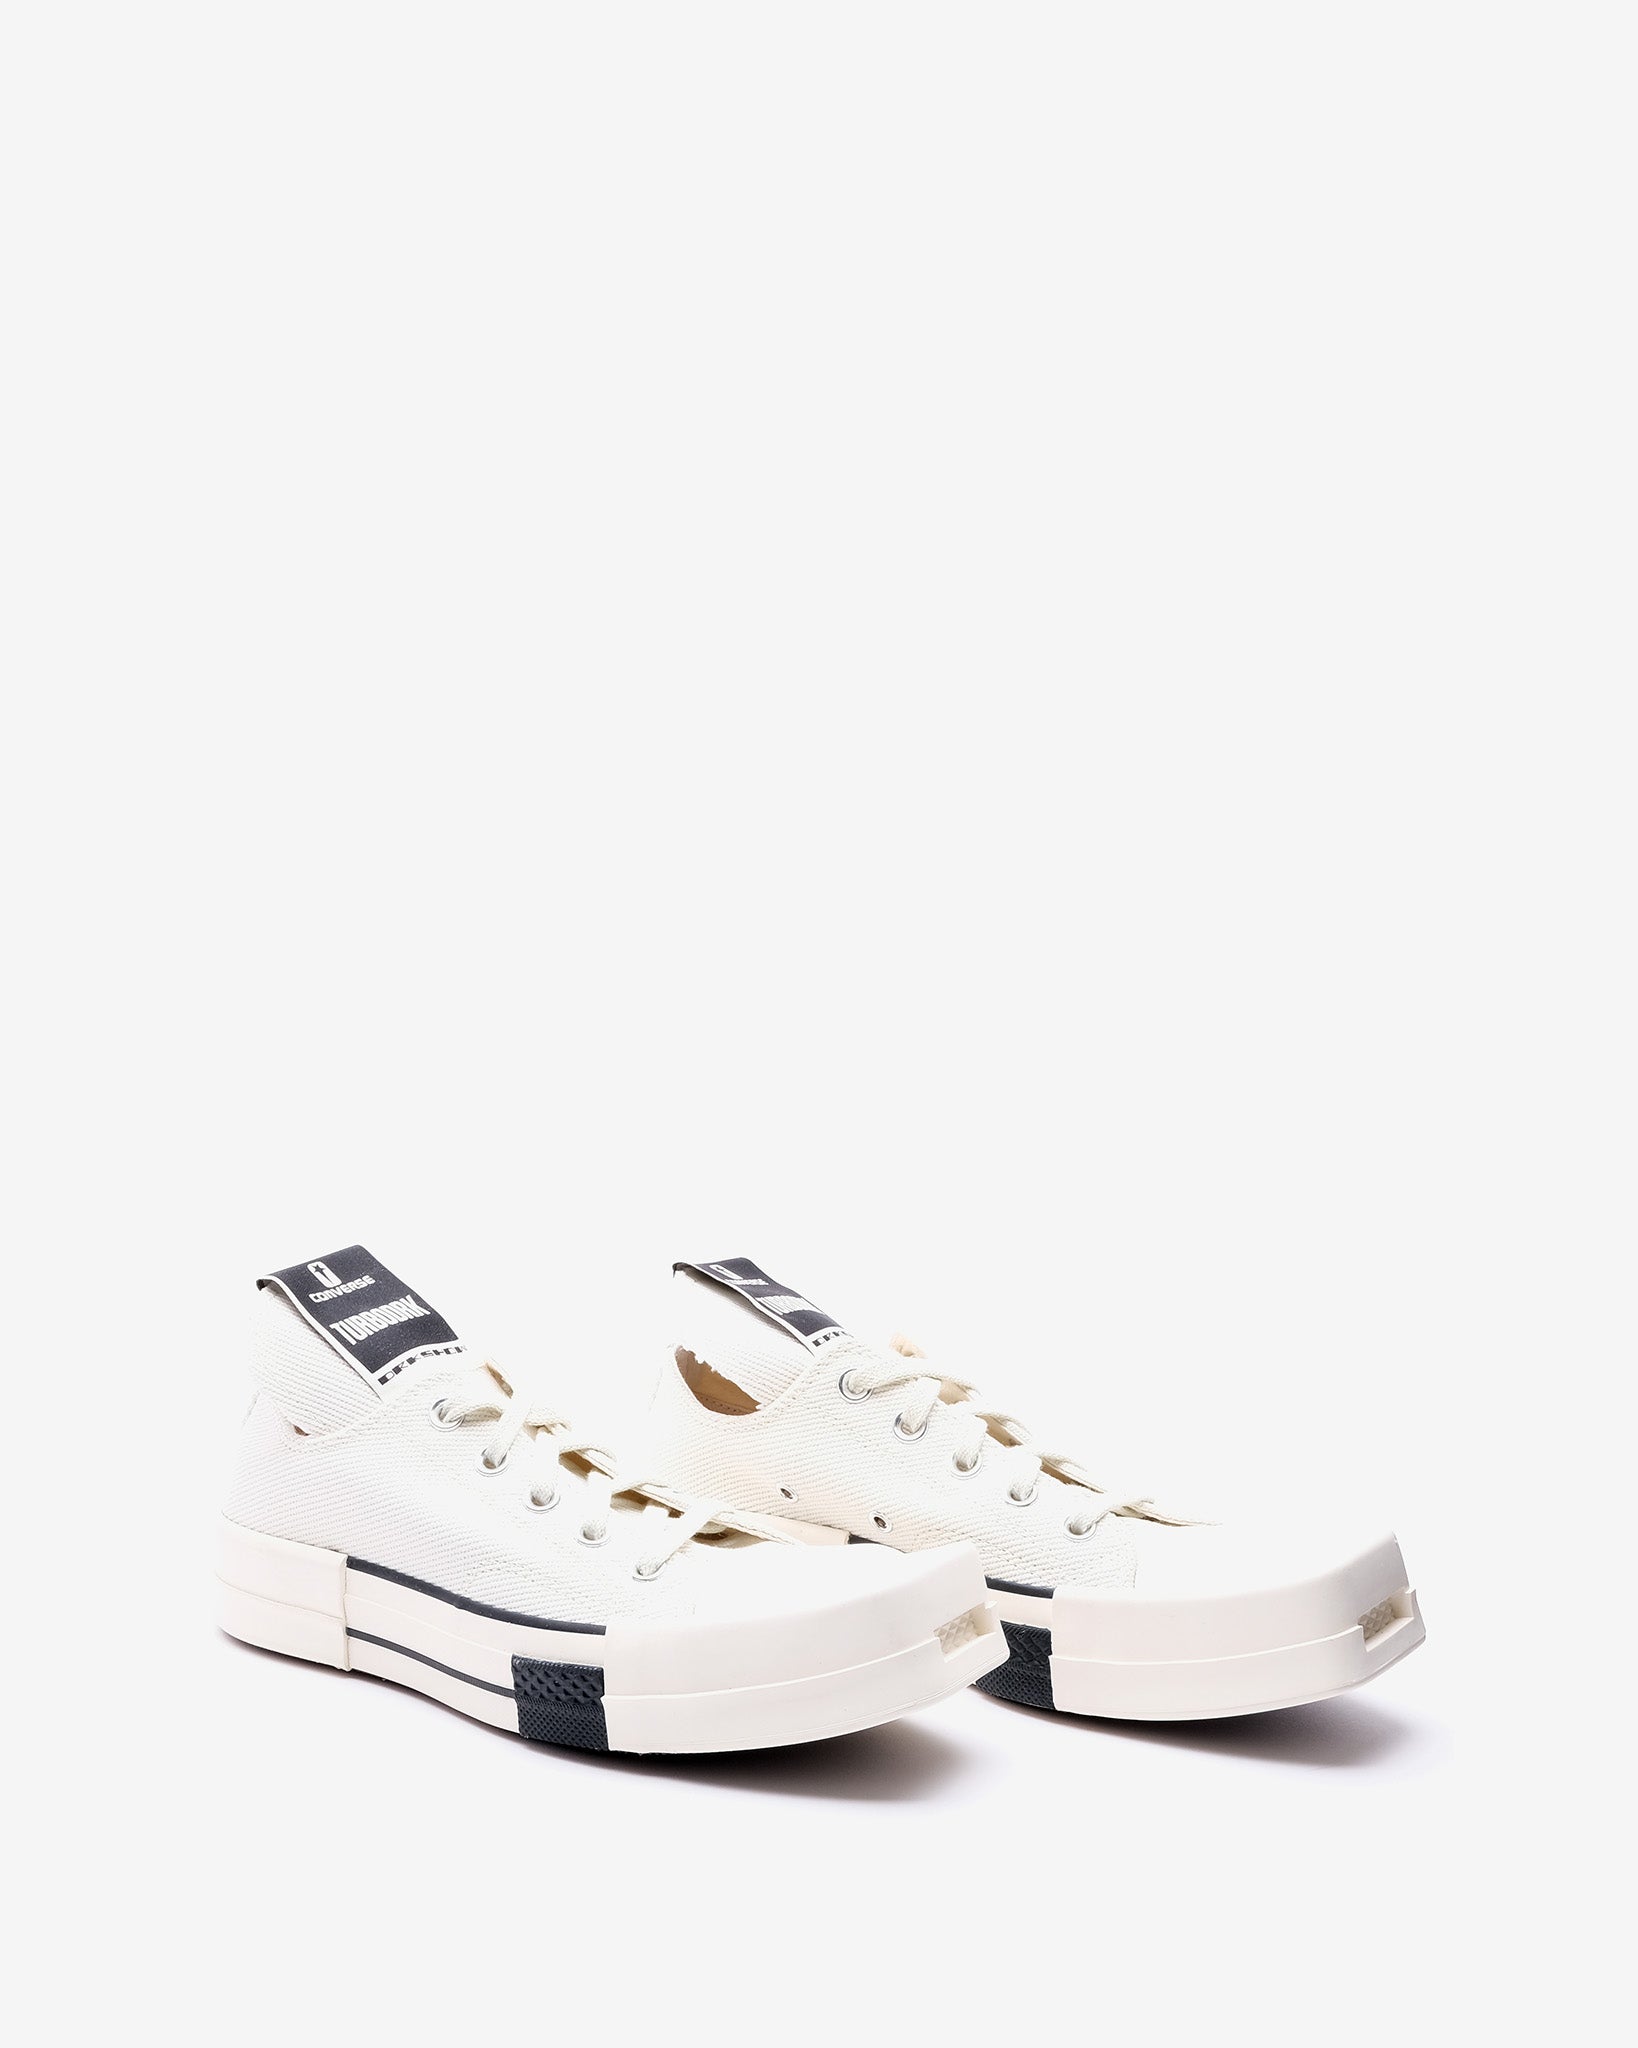 X Converse TURBODRK OX White Sneakers